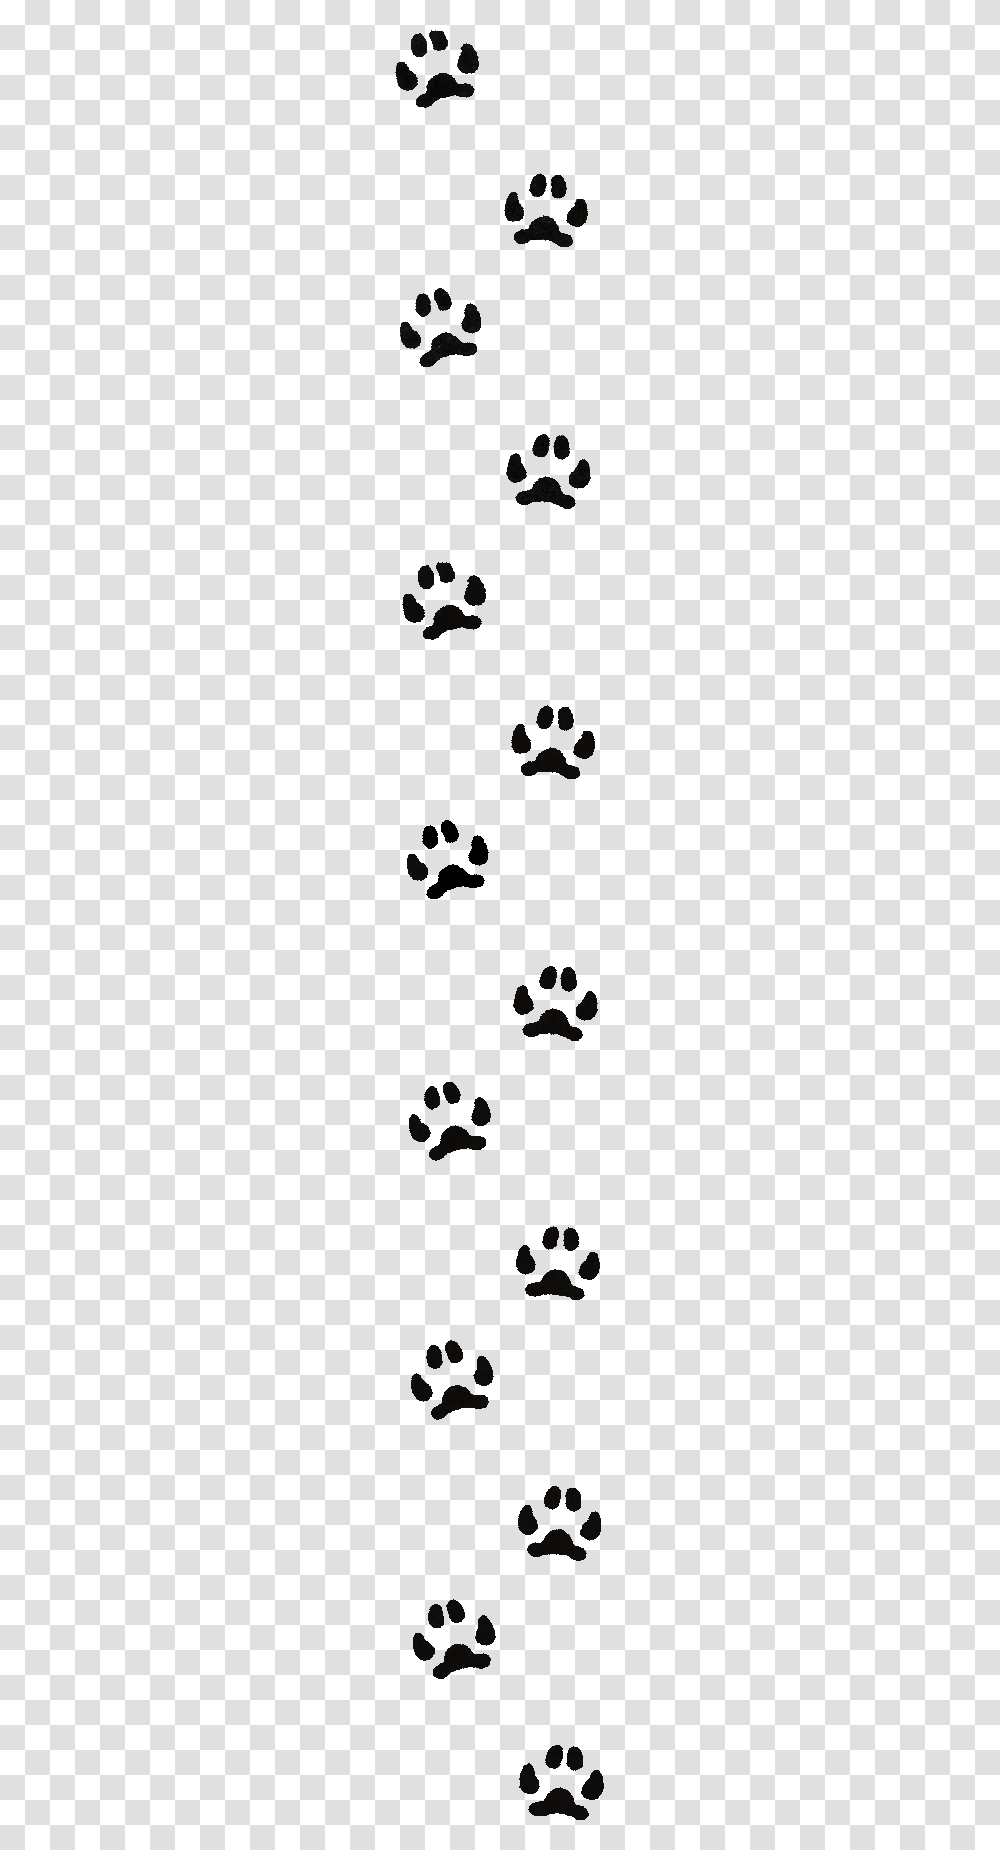 Paw Print Border Line, Outdoors, Nature, Astronomy, Outer Space Transparent Png